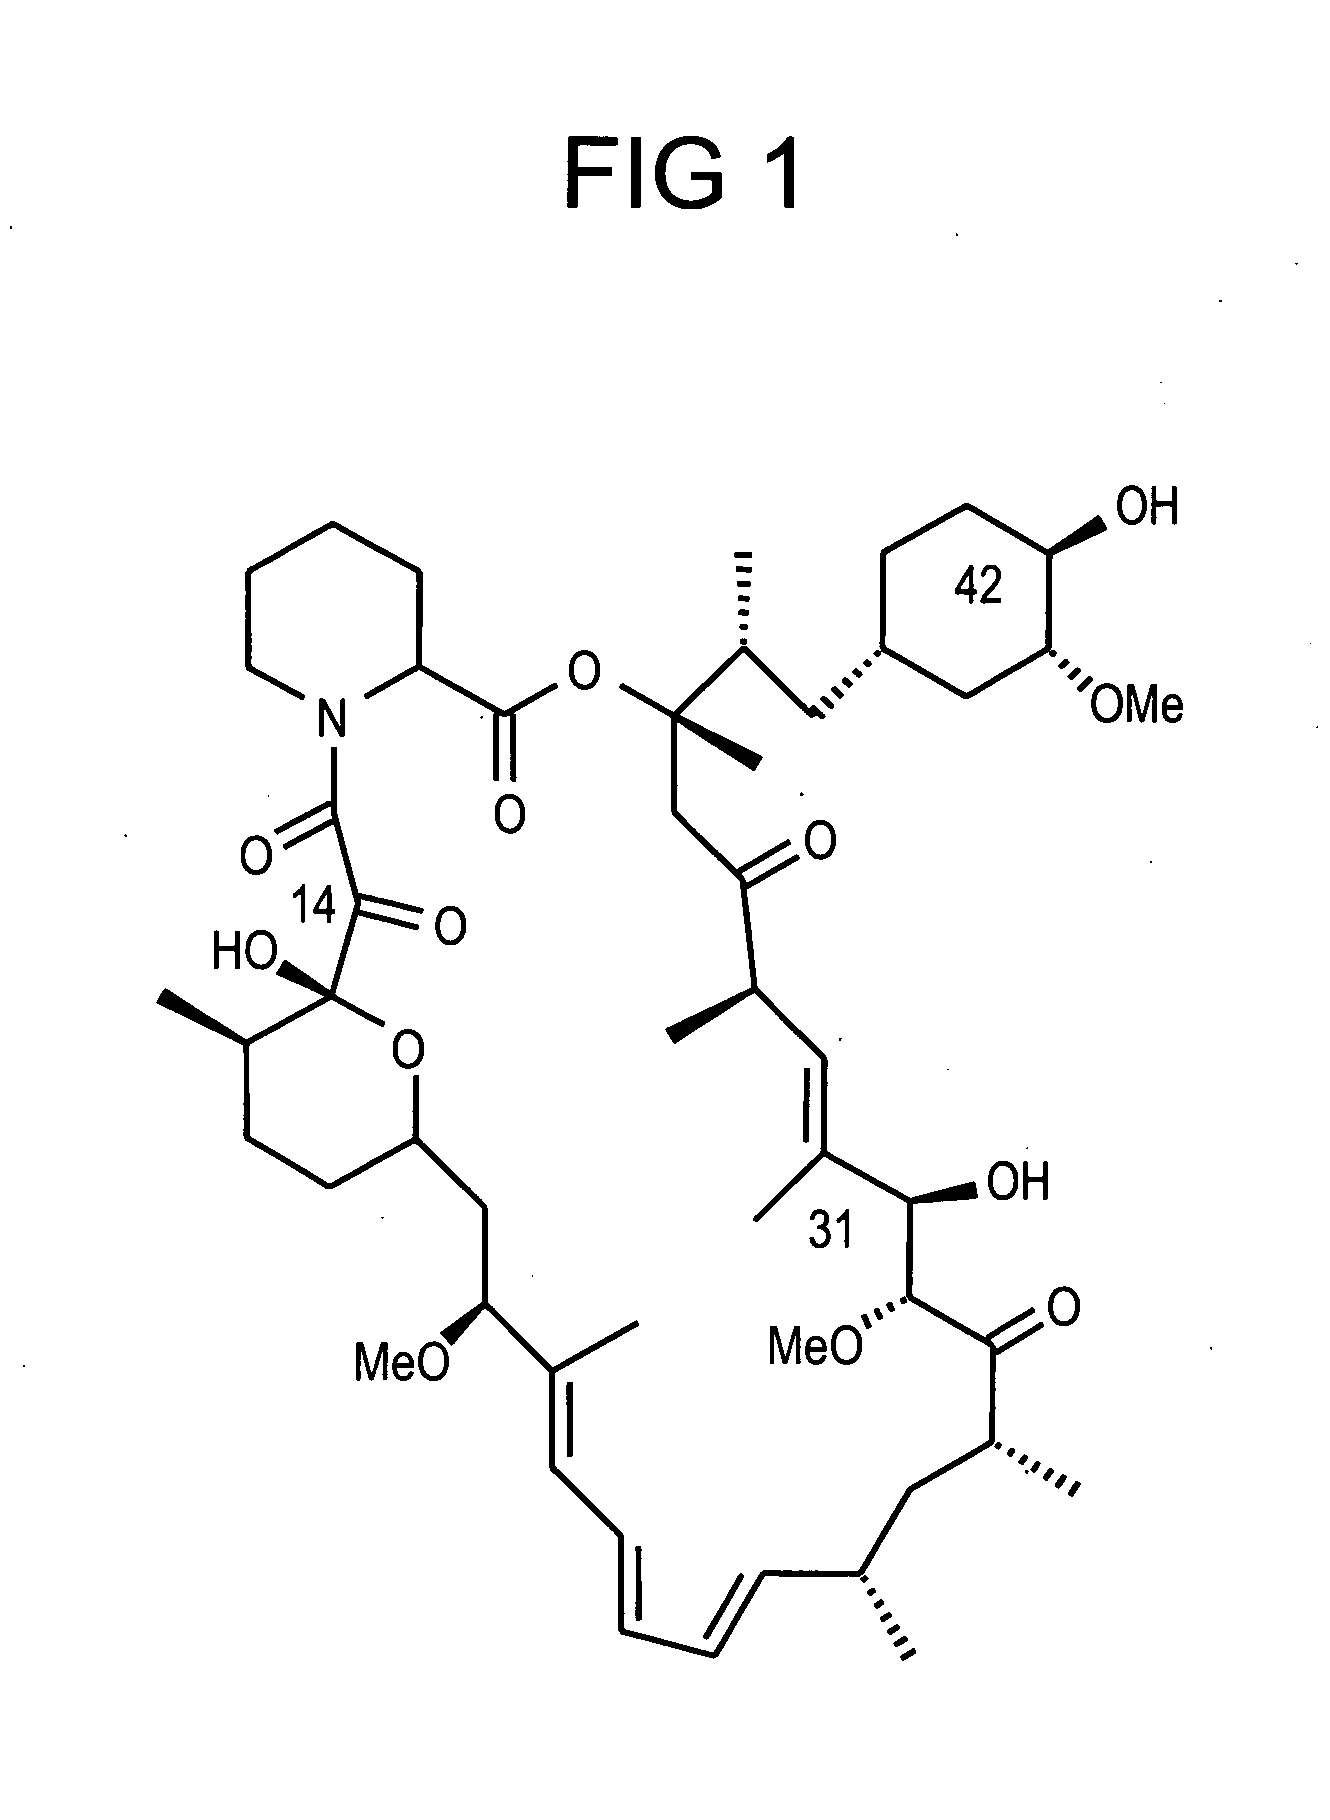 Combination of rapamycin and its tetrazole isomers and epimers, methods of making and using the same